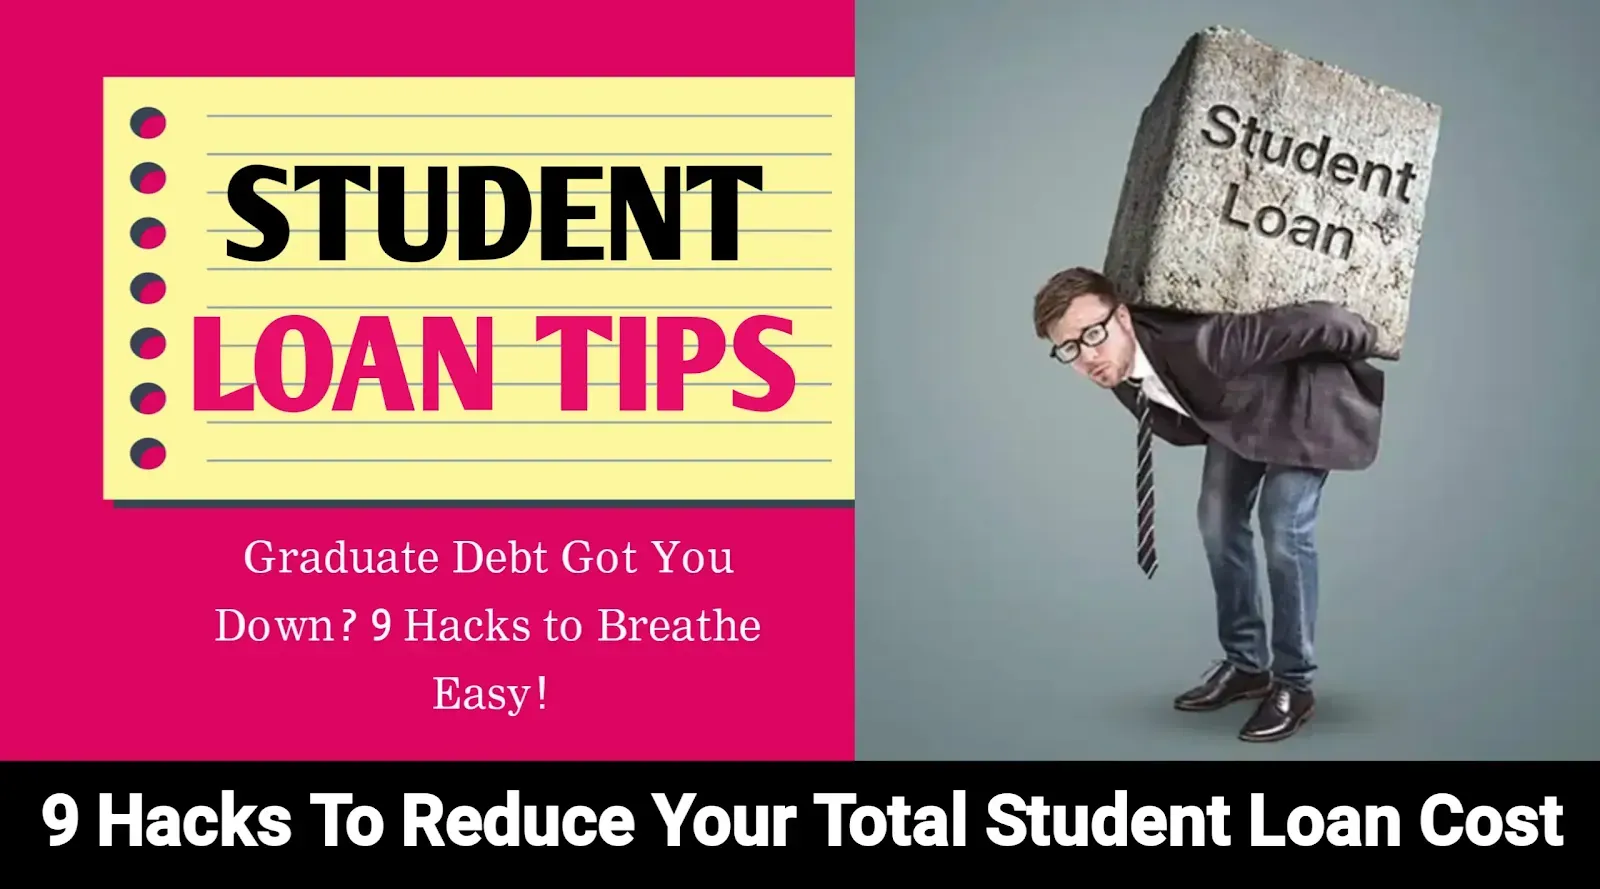 9 Hacks To Reduce Your Total Student Loan Cost